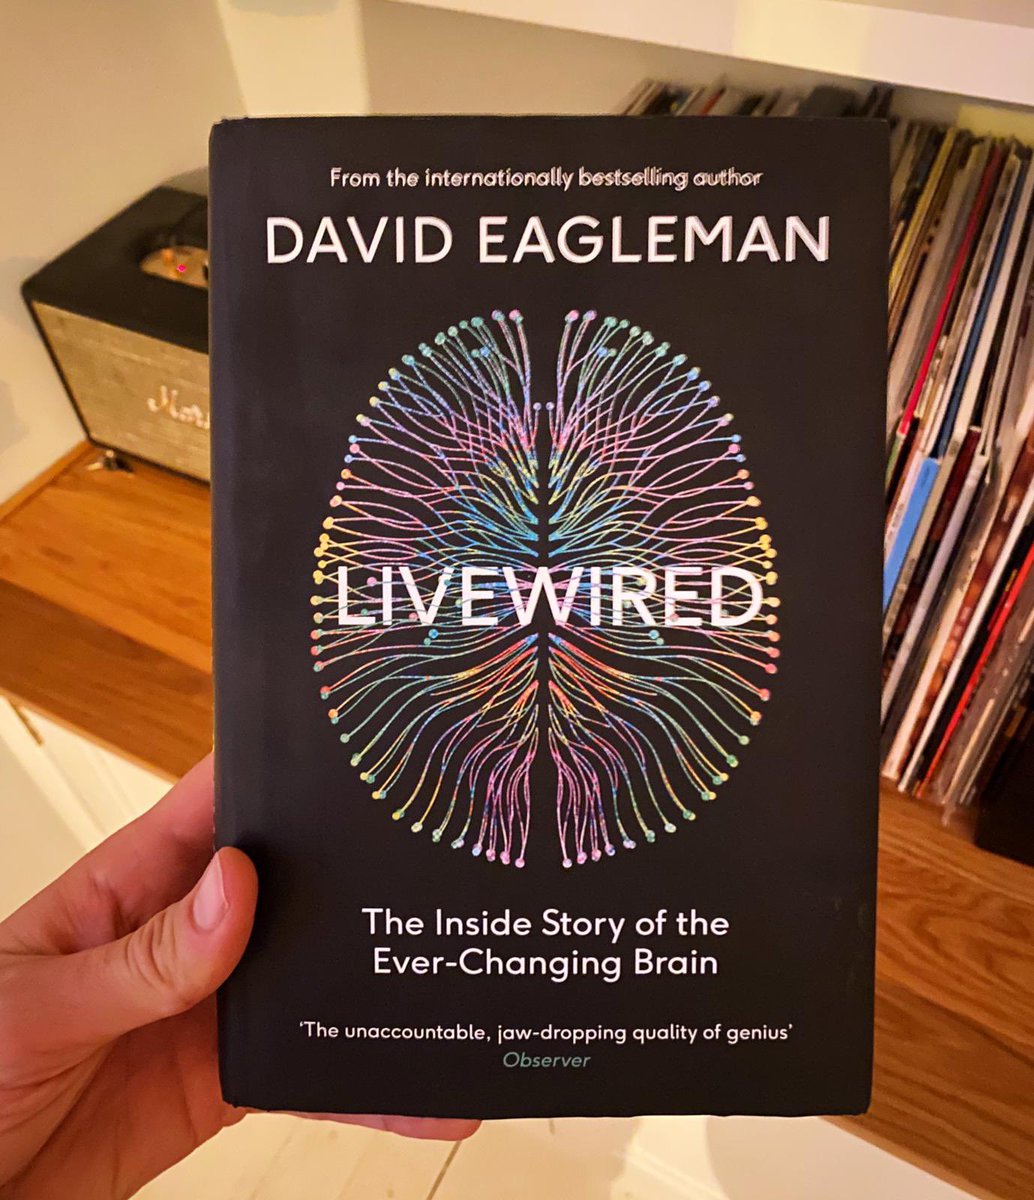 Have absolutely loved this - brain-bending, original and beautifully explained neuroscience from the brilliant @davideagleman. Learn about your mind and then have it blown…